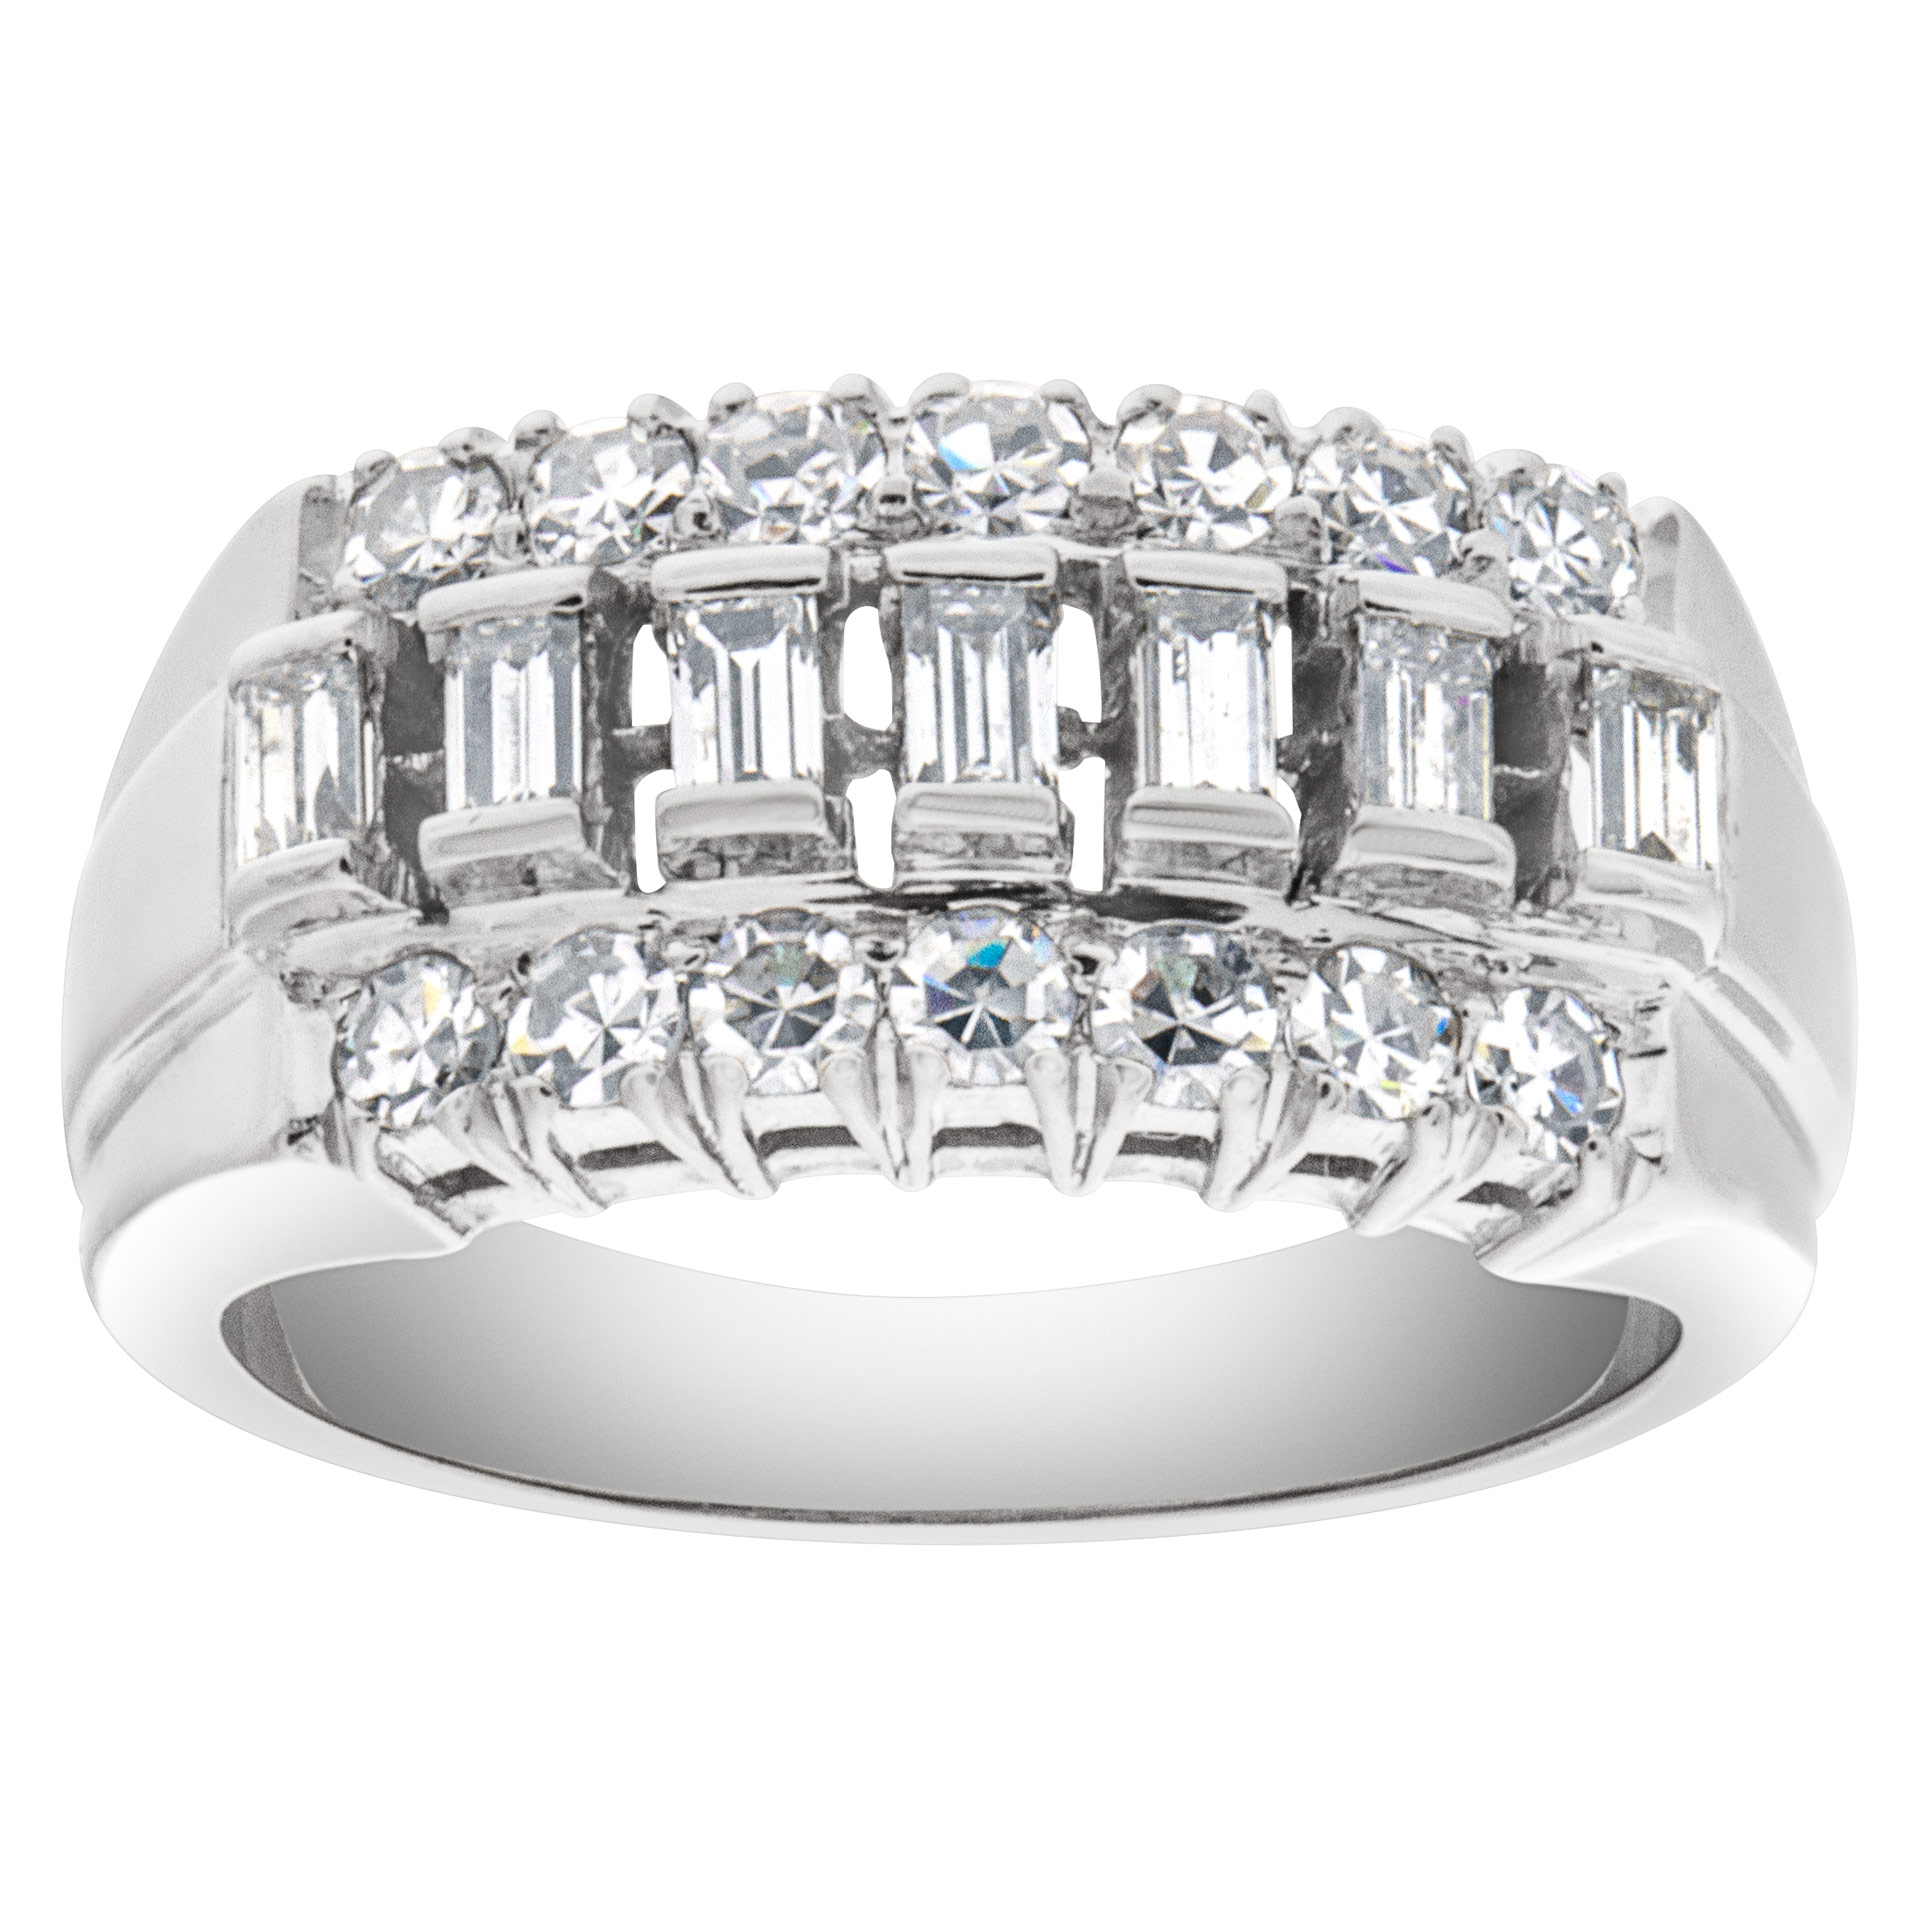 Vintage diamond pinky ring in 14k white gold with 0.65 carats in round & baguette diamonds